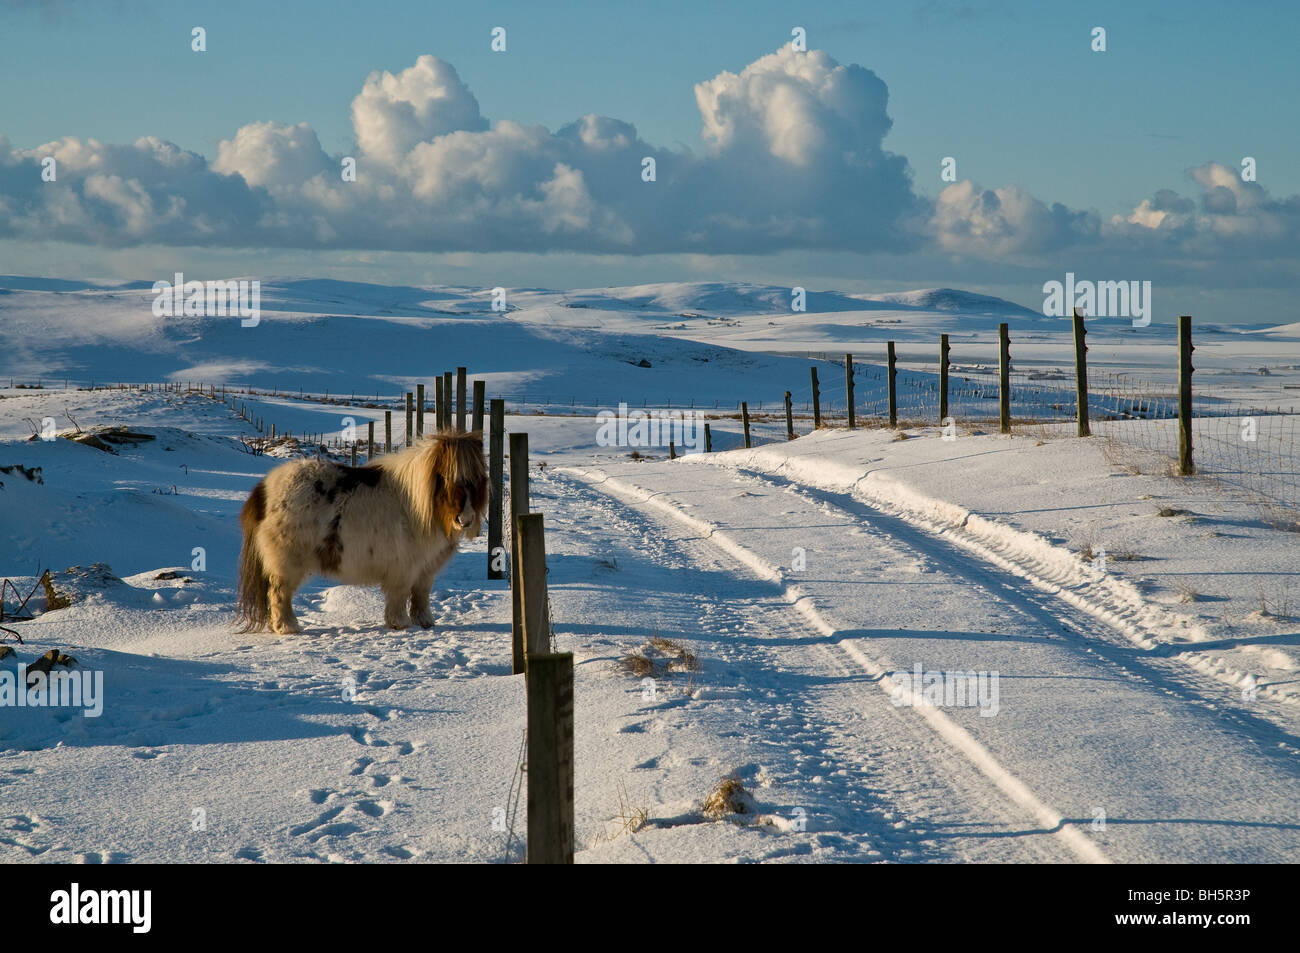 dh Tuskerbister ORPHIR ORKNEY Shetland pony in snow covered field road and Stenness countryside snowy winter rural uk animals Stock Photo